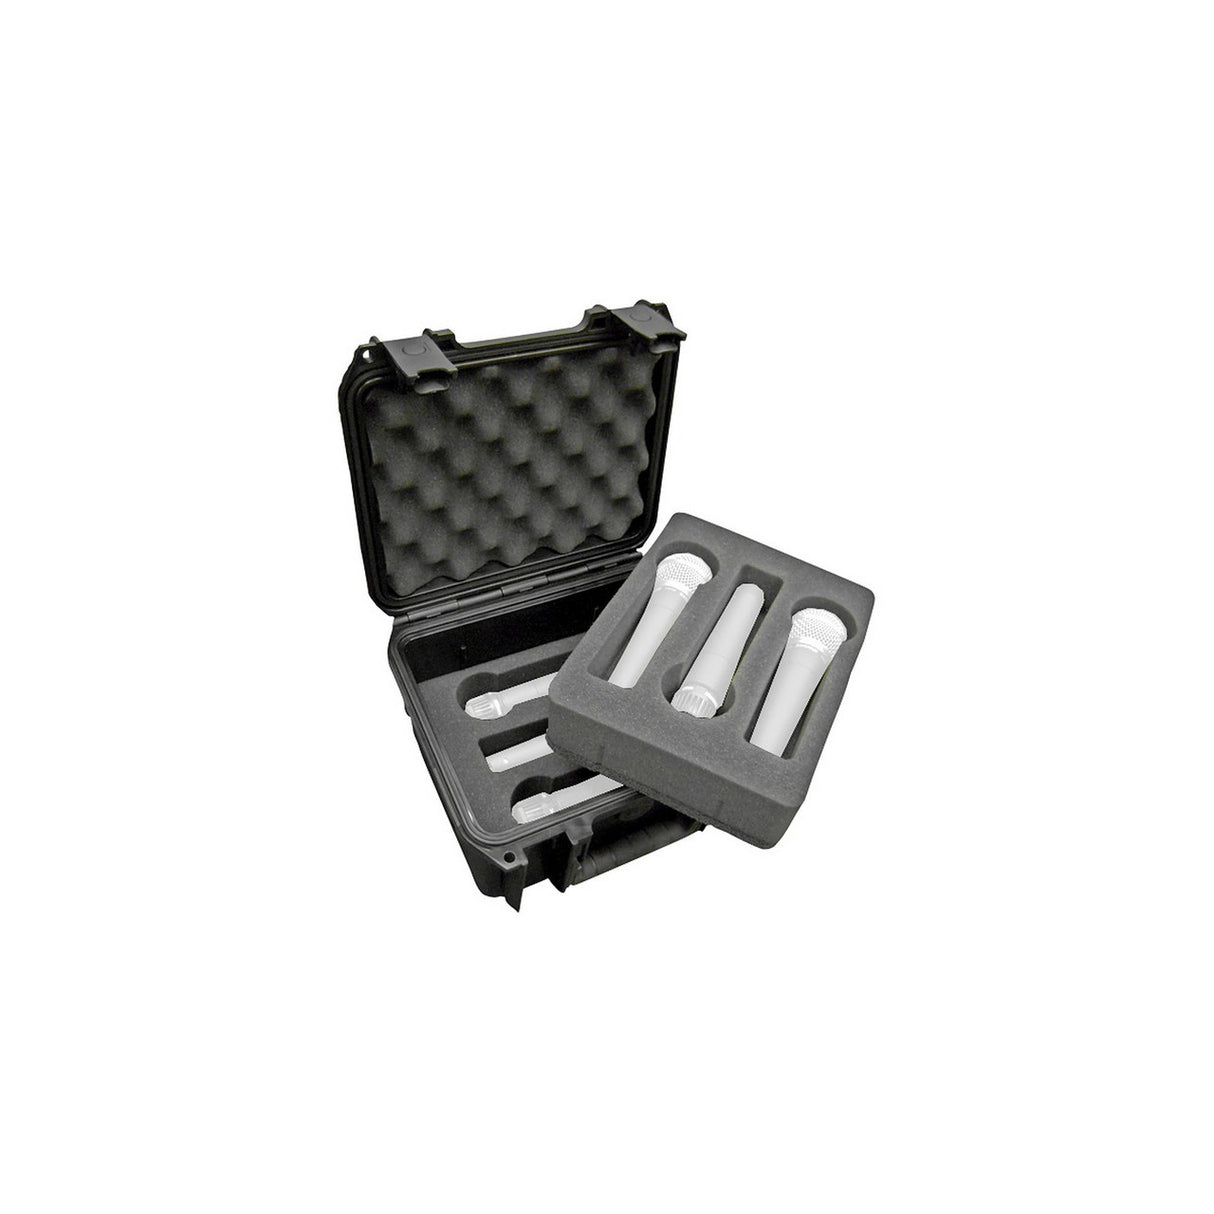 SKB 3I-0907-MC6 | iSeries Waterproof Case That Holds Up To 6 Microphones